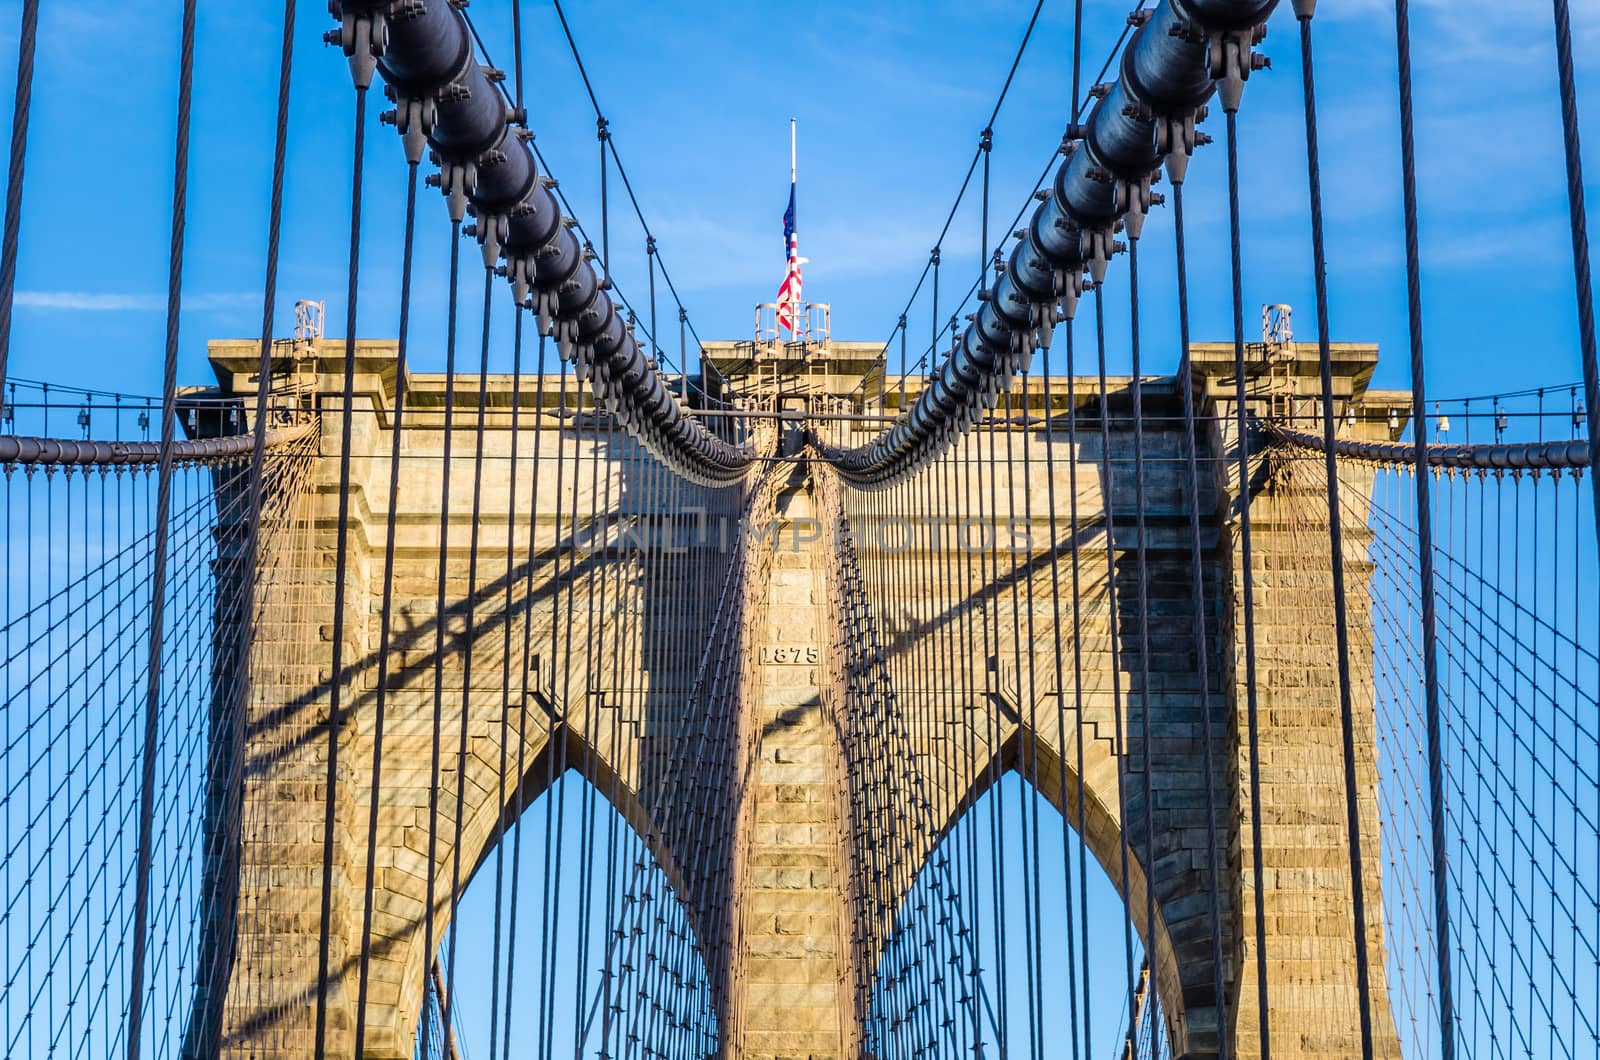 The web of cables of Brooklyn bridge in a sunny afternoon on a blue sky as background